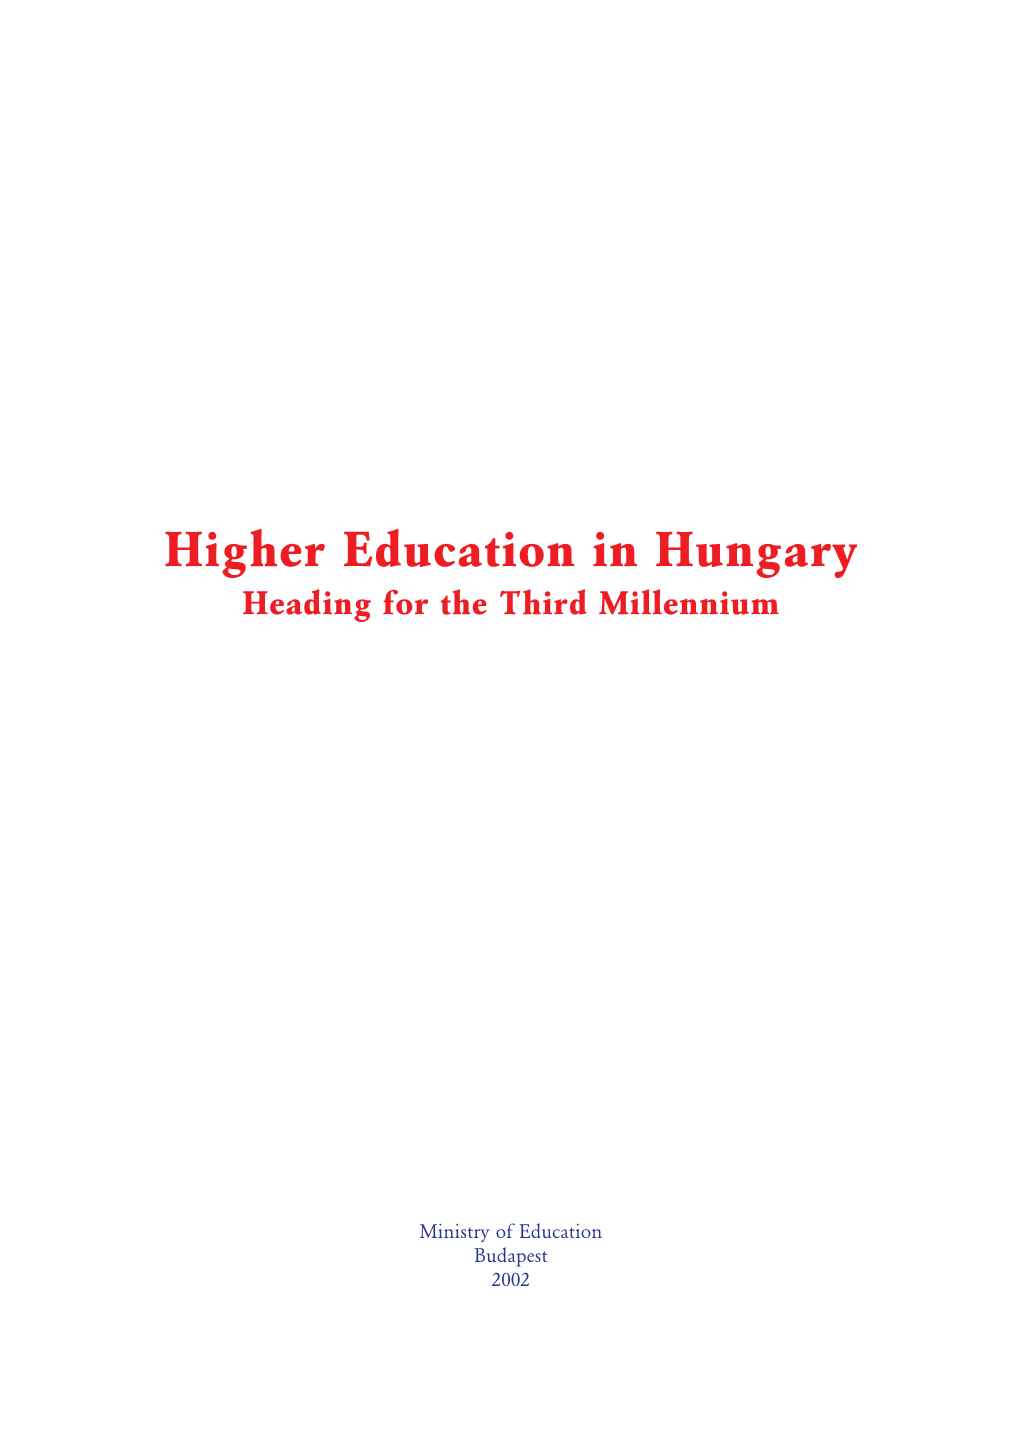 Higher Education in Hungary Heading for the Third Millennium